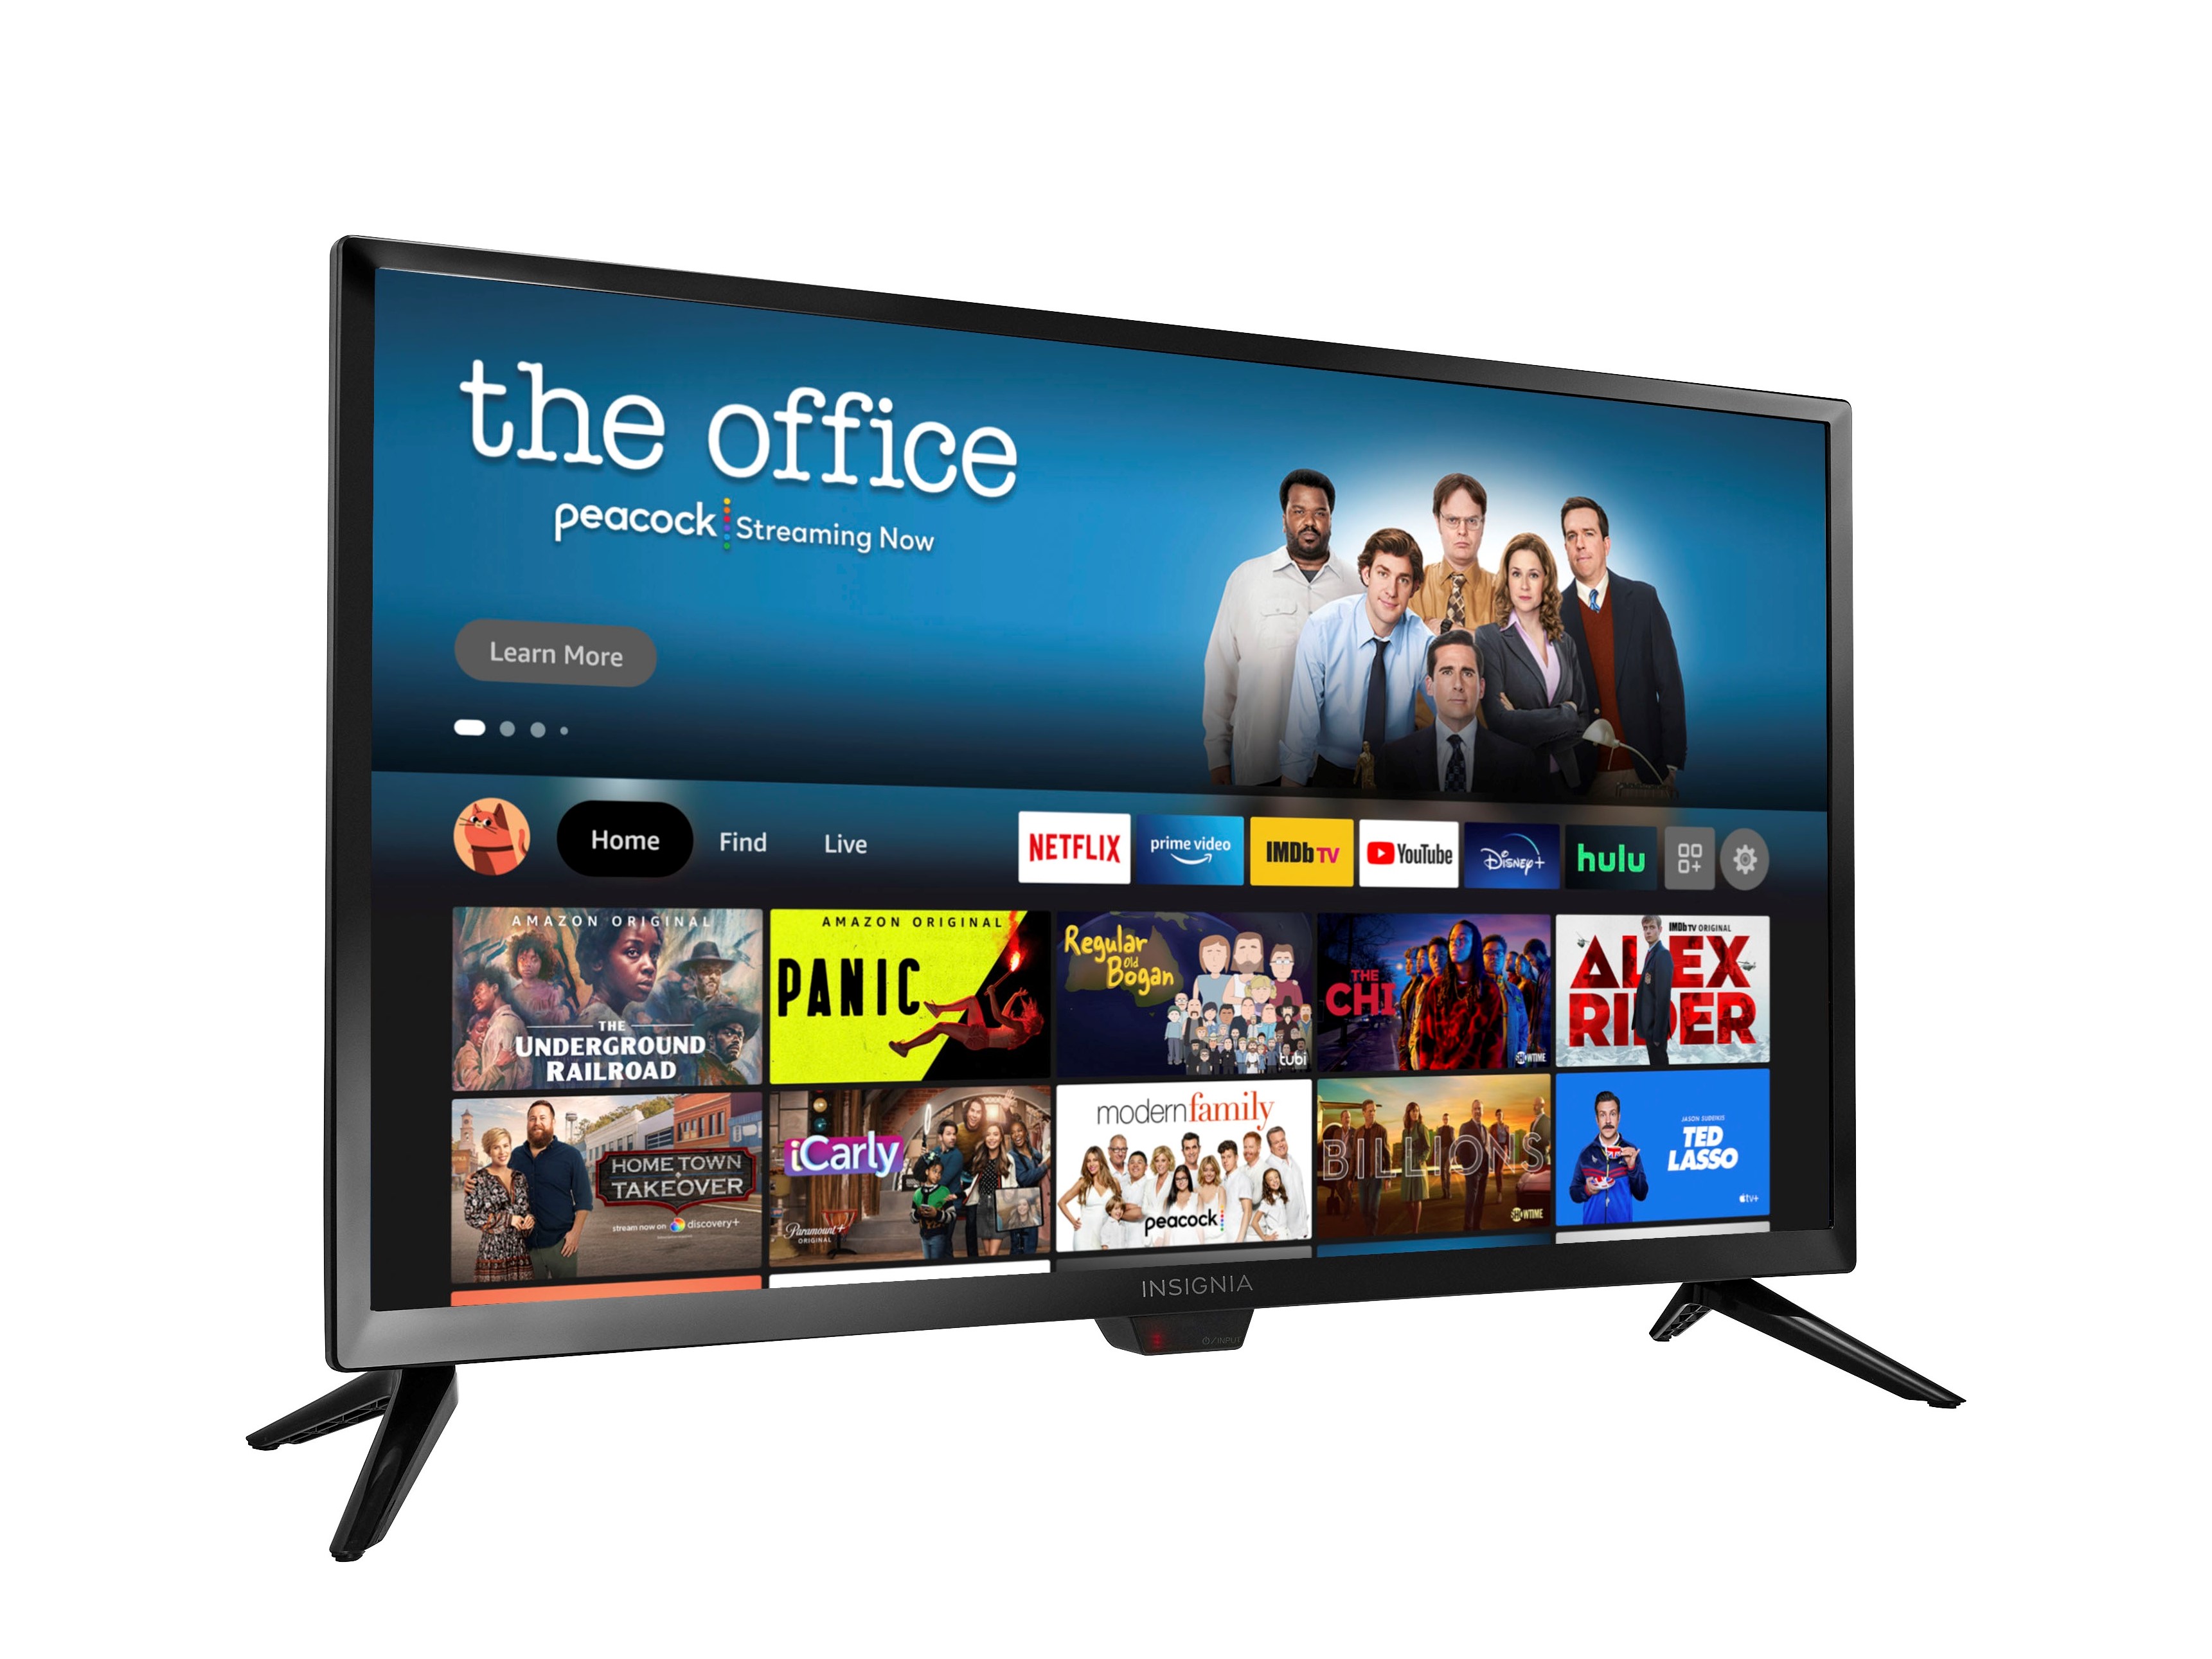 Best Cyber Monday TV Deals Live Today, Handpicked by Our Editors